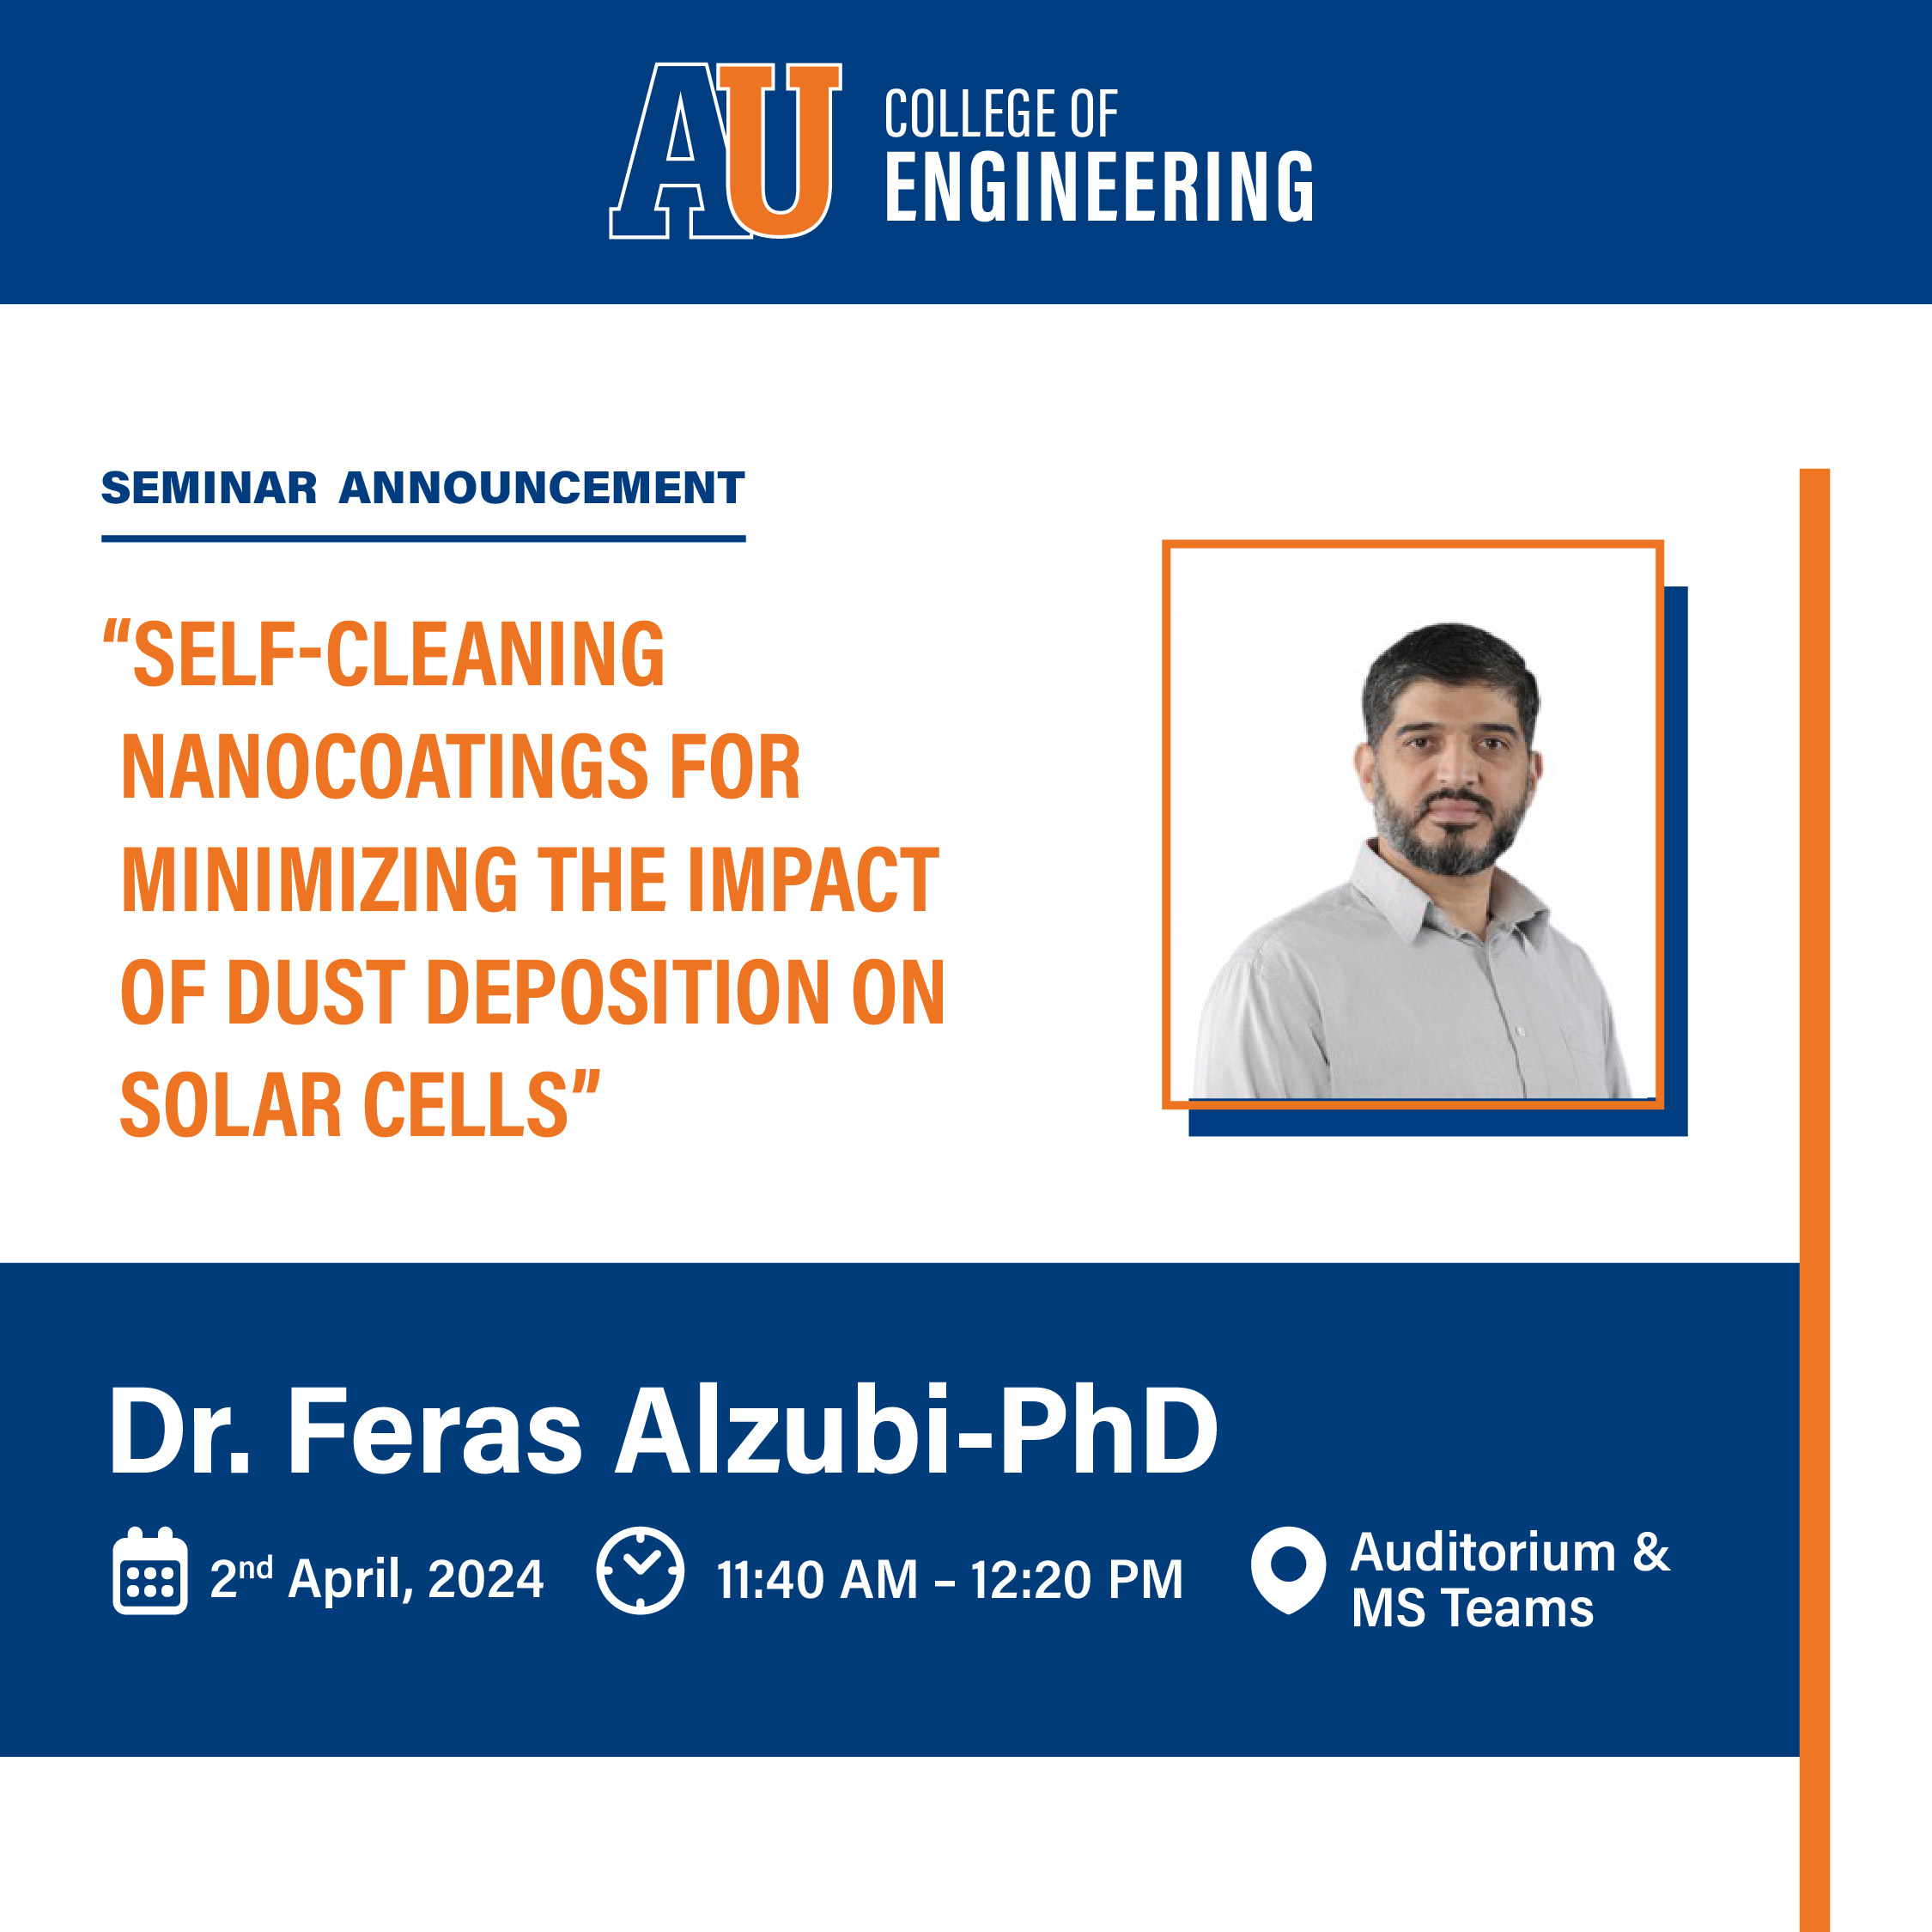 SELF-CLEANING NANOCOATINGS FOR MINIMIZING THE IMPACT OF DUST DEPOSITION ON SOLAR CELLS